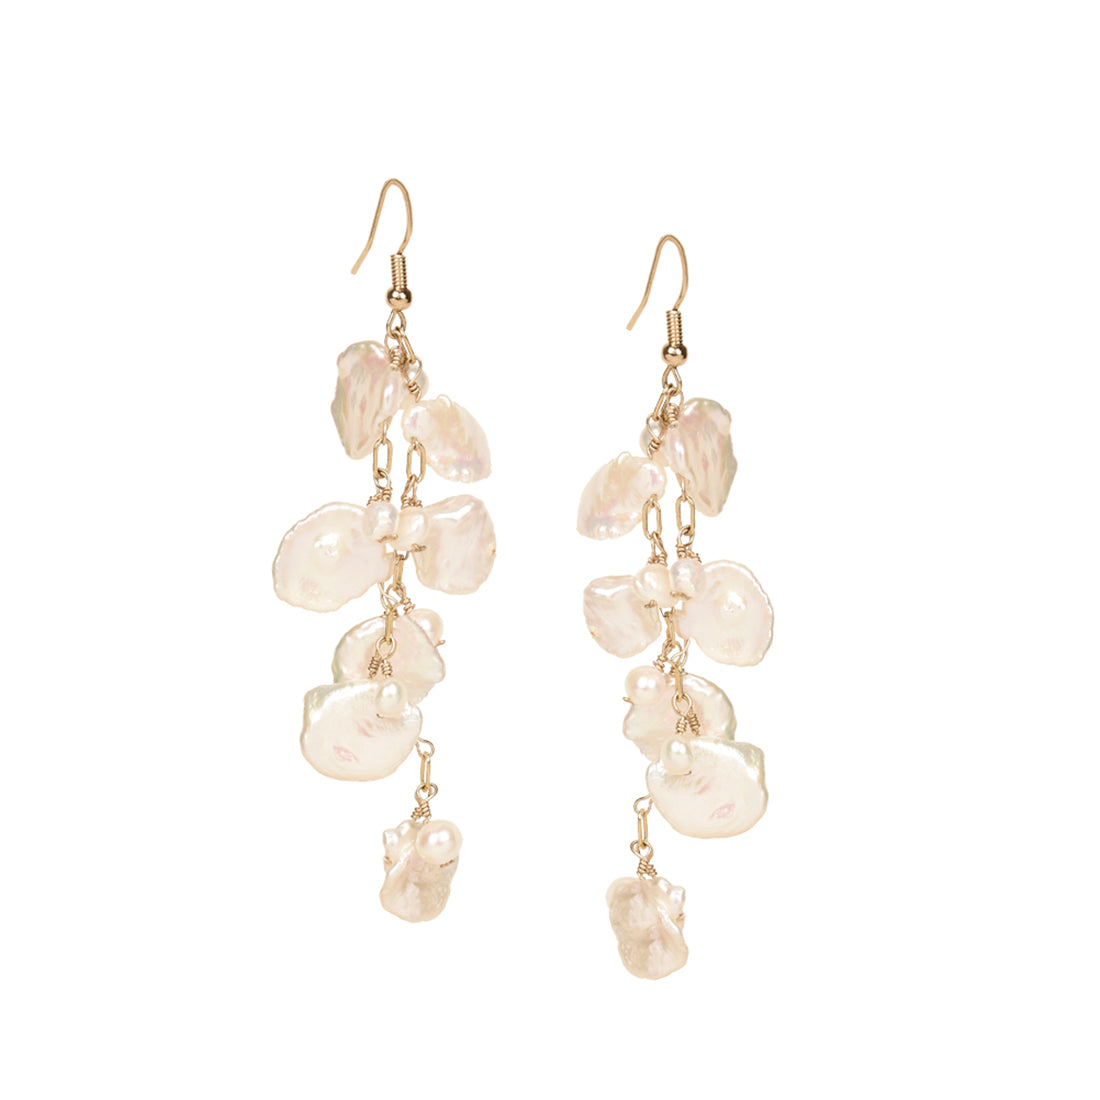 Gold plated brass earrings with cascades of fresh water pearls